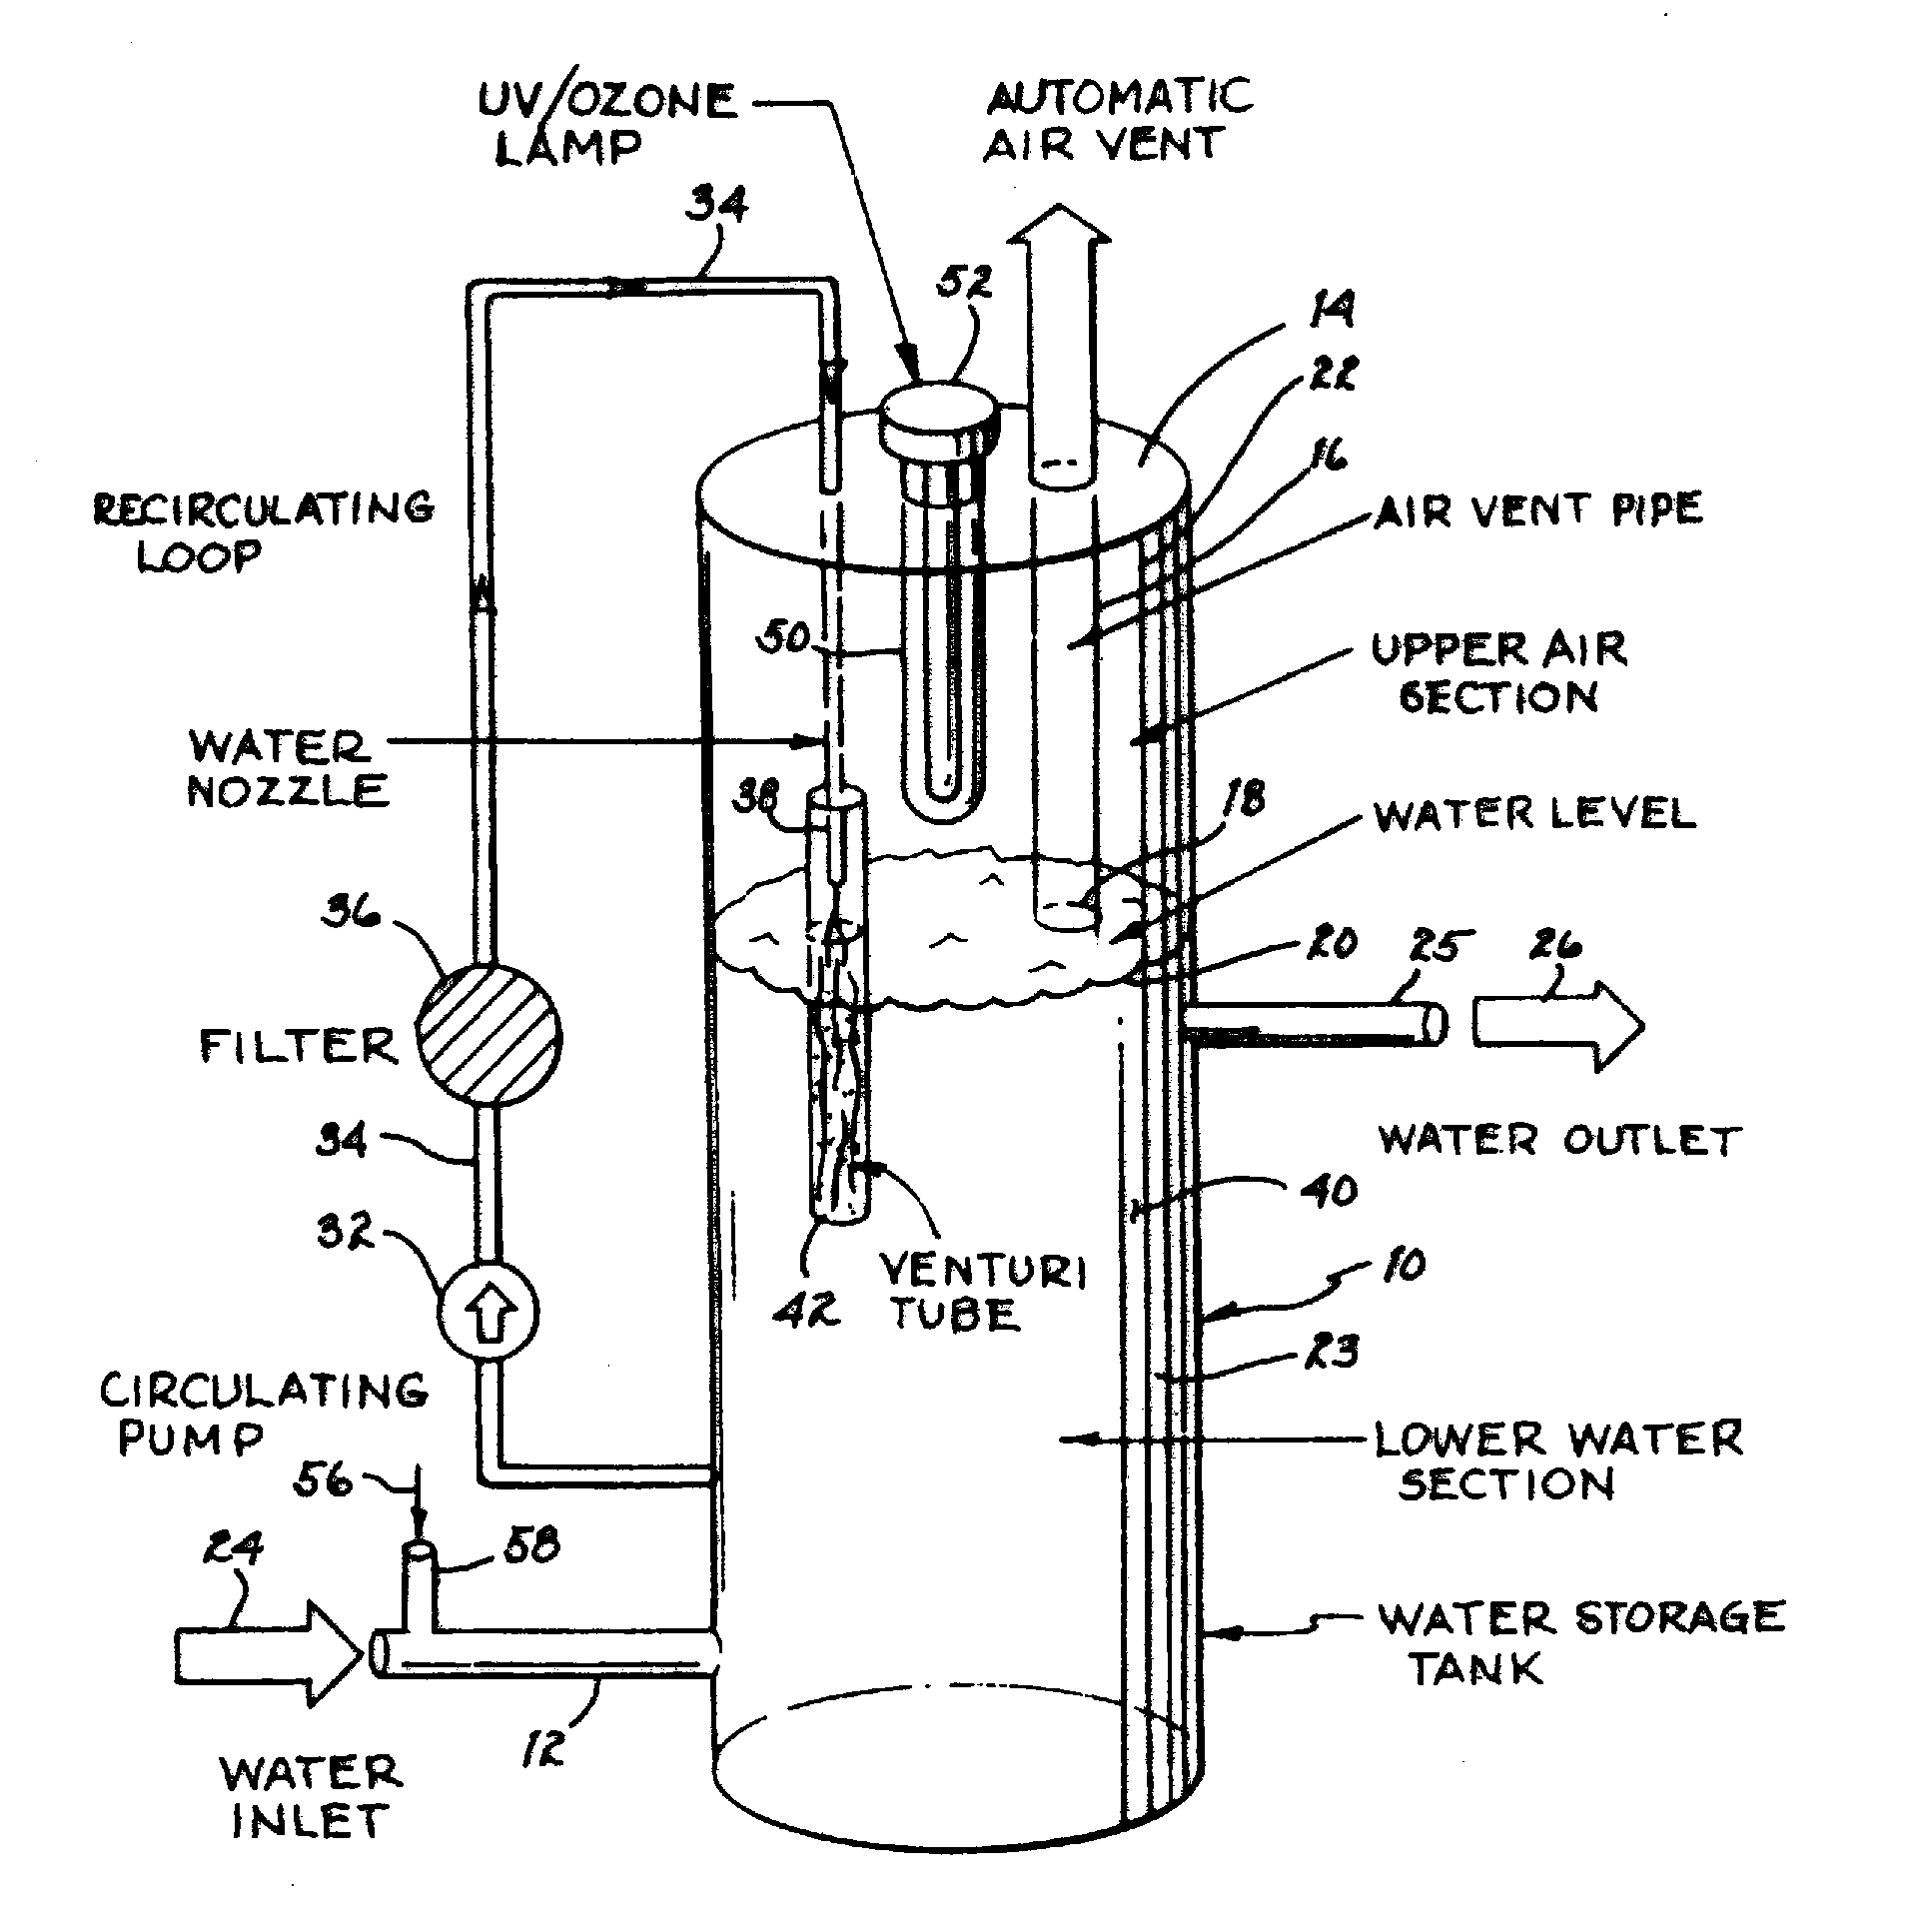 Apparatus and method for removing arsenic and inorganic compositions from water